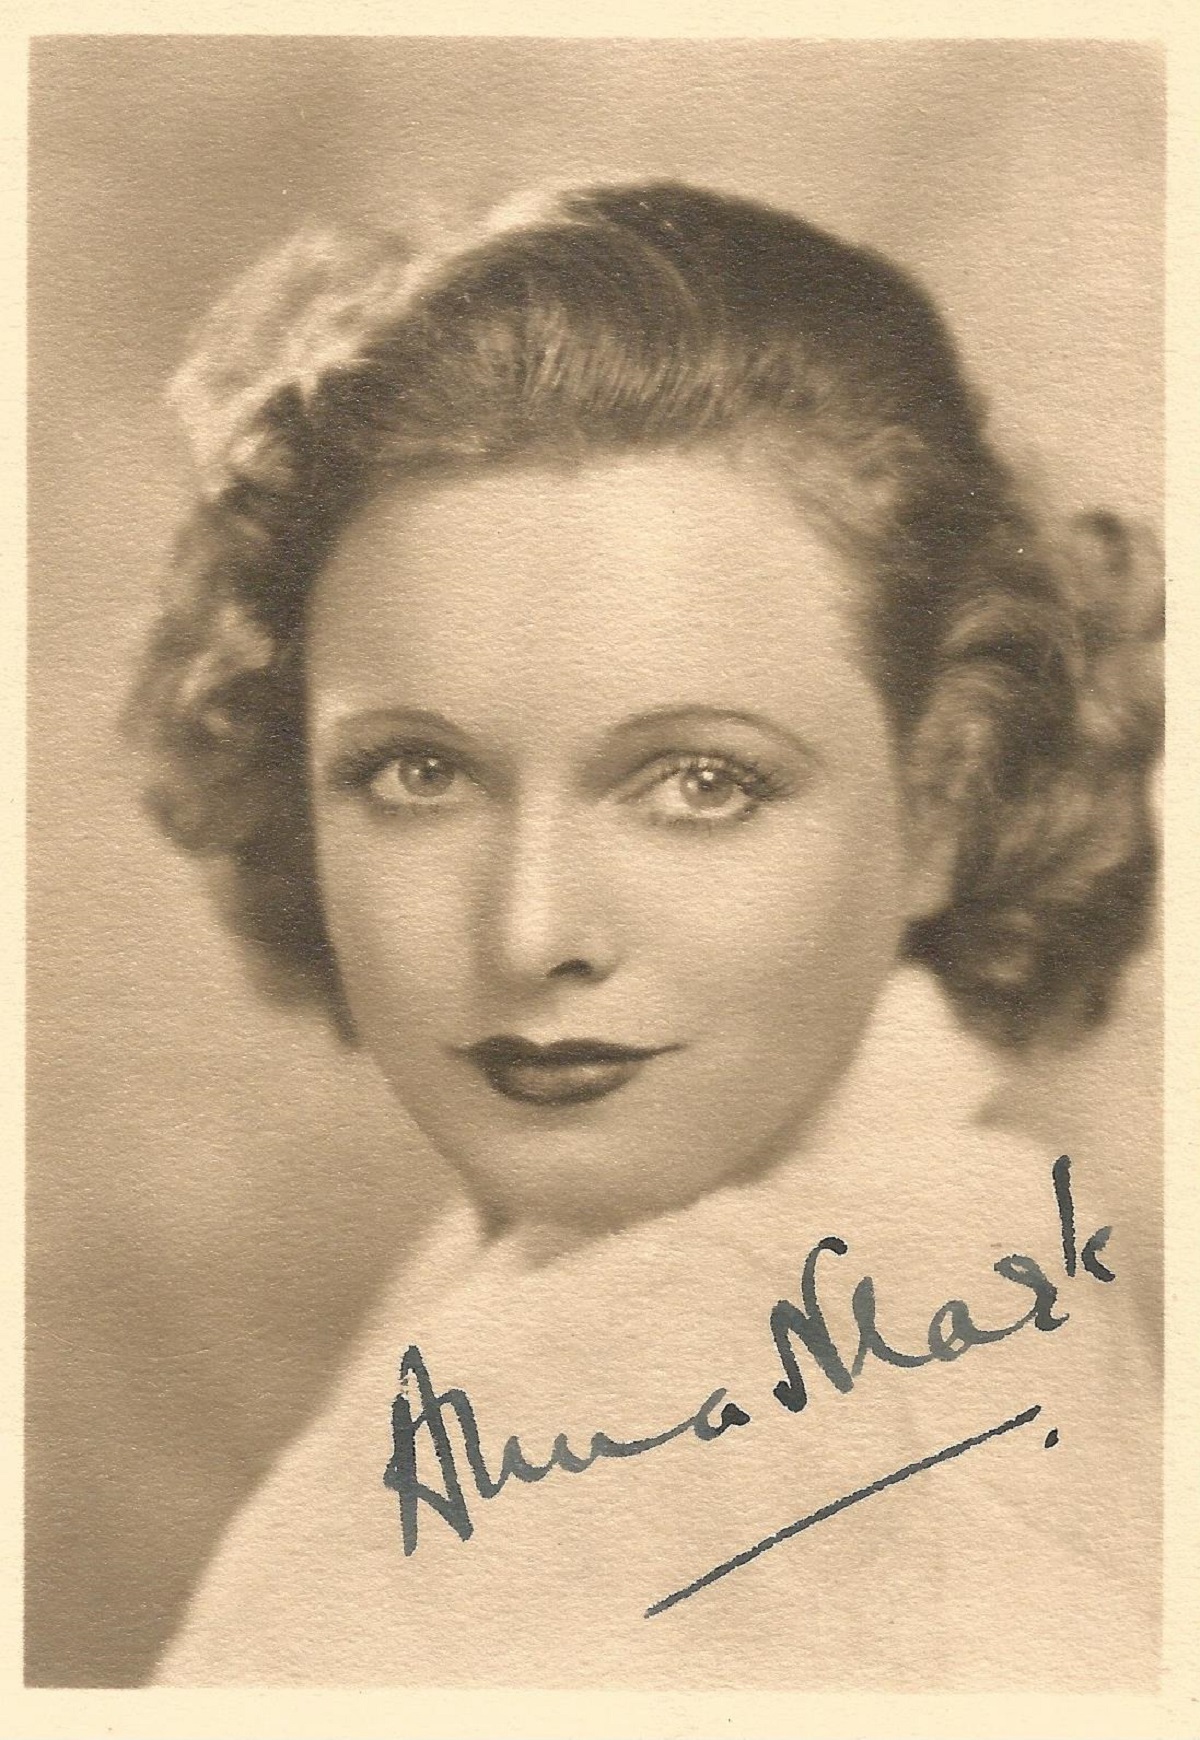 Anna Neagle signed 6x4 vintage photo. Good Condition. All autographs are genuine hand signed and